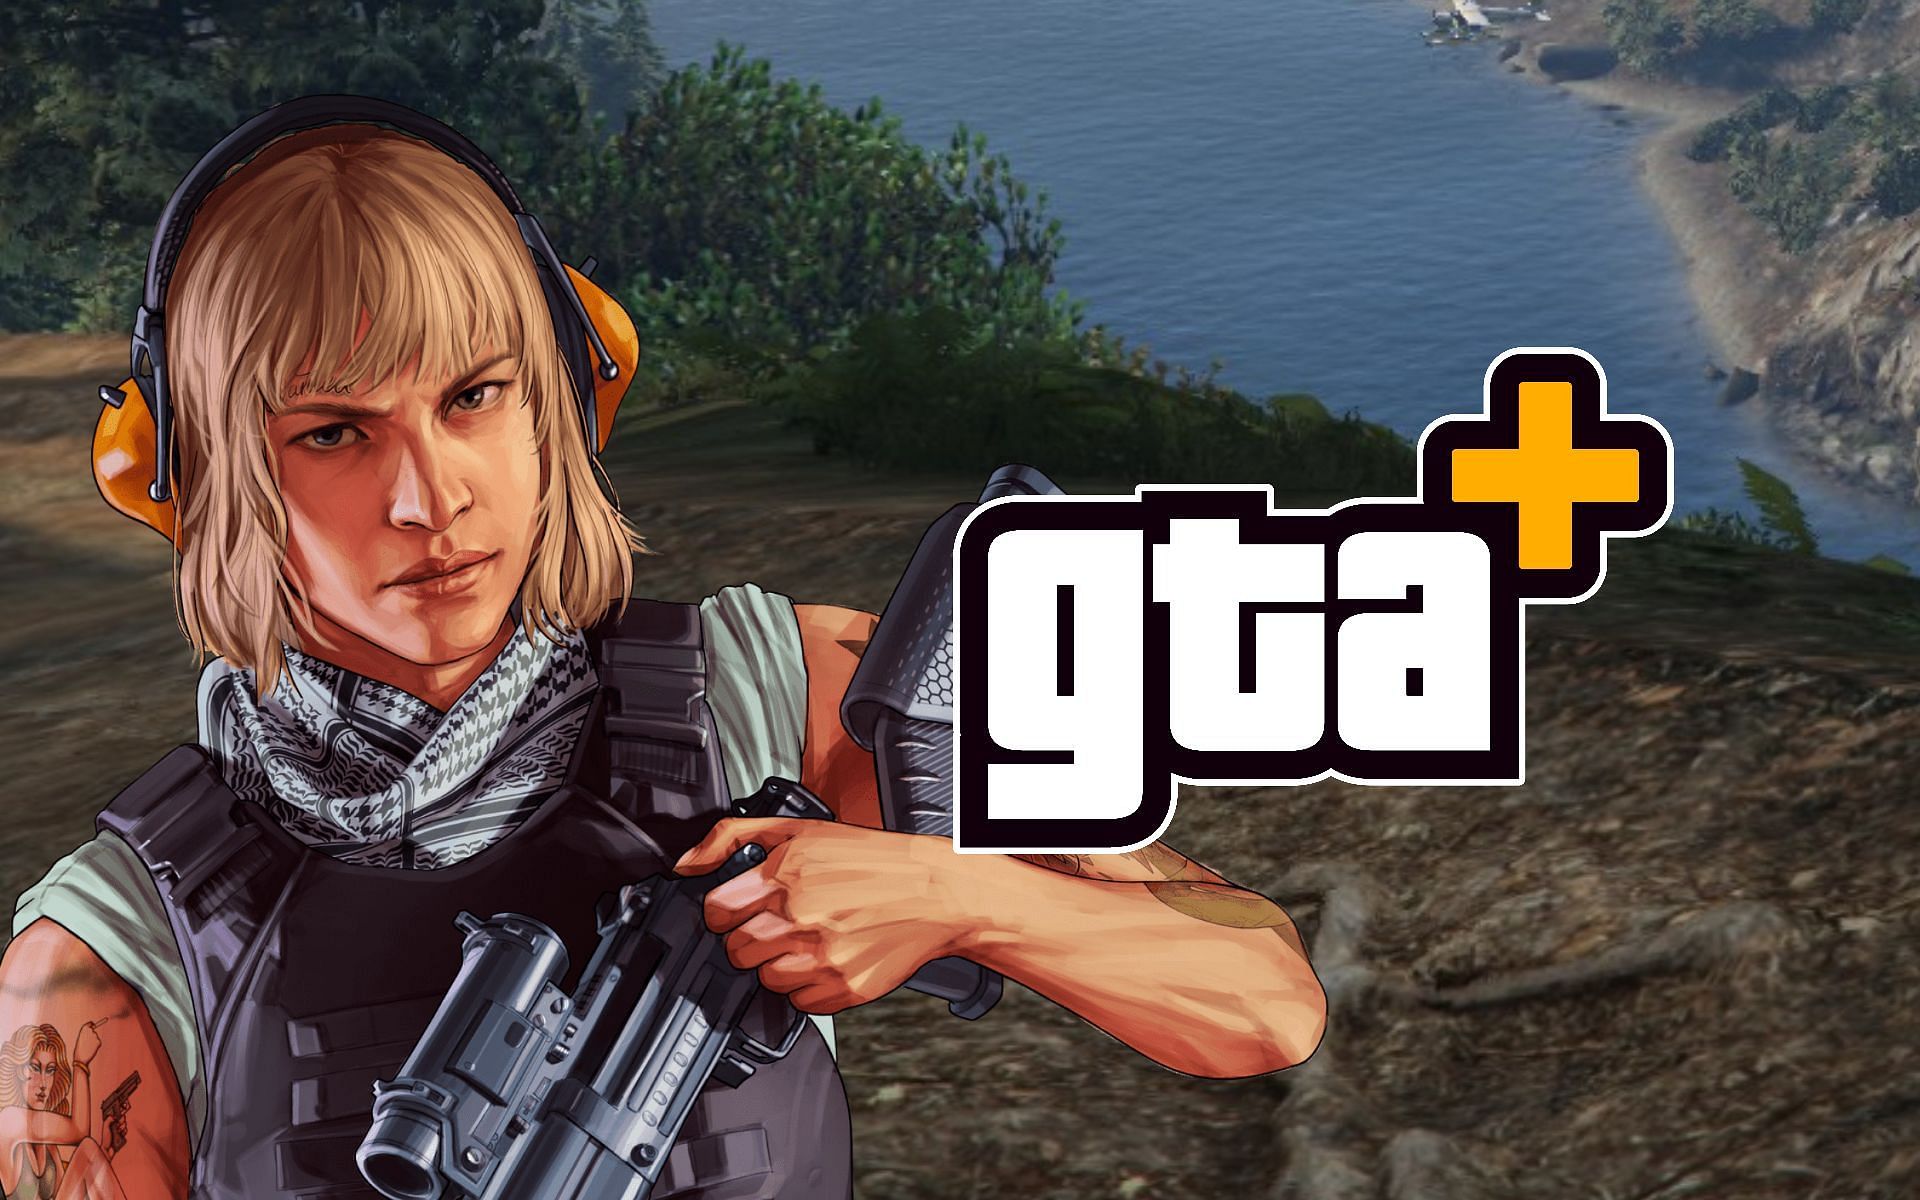 Most of the content in this month is related to Gunrunning (Image via Rockstar Games)